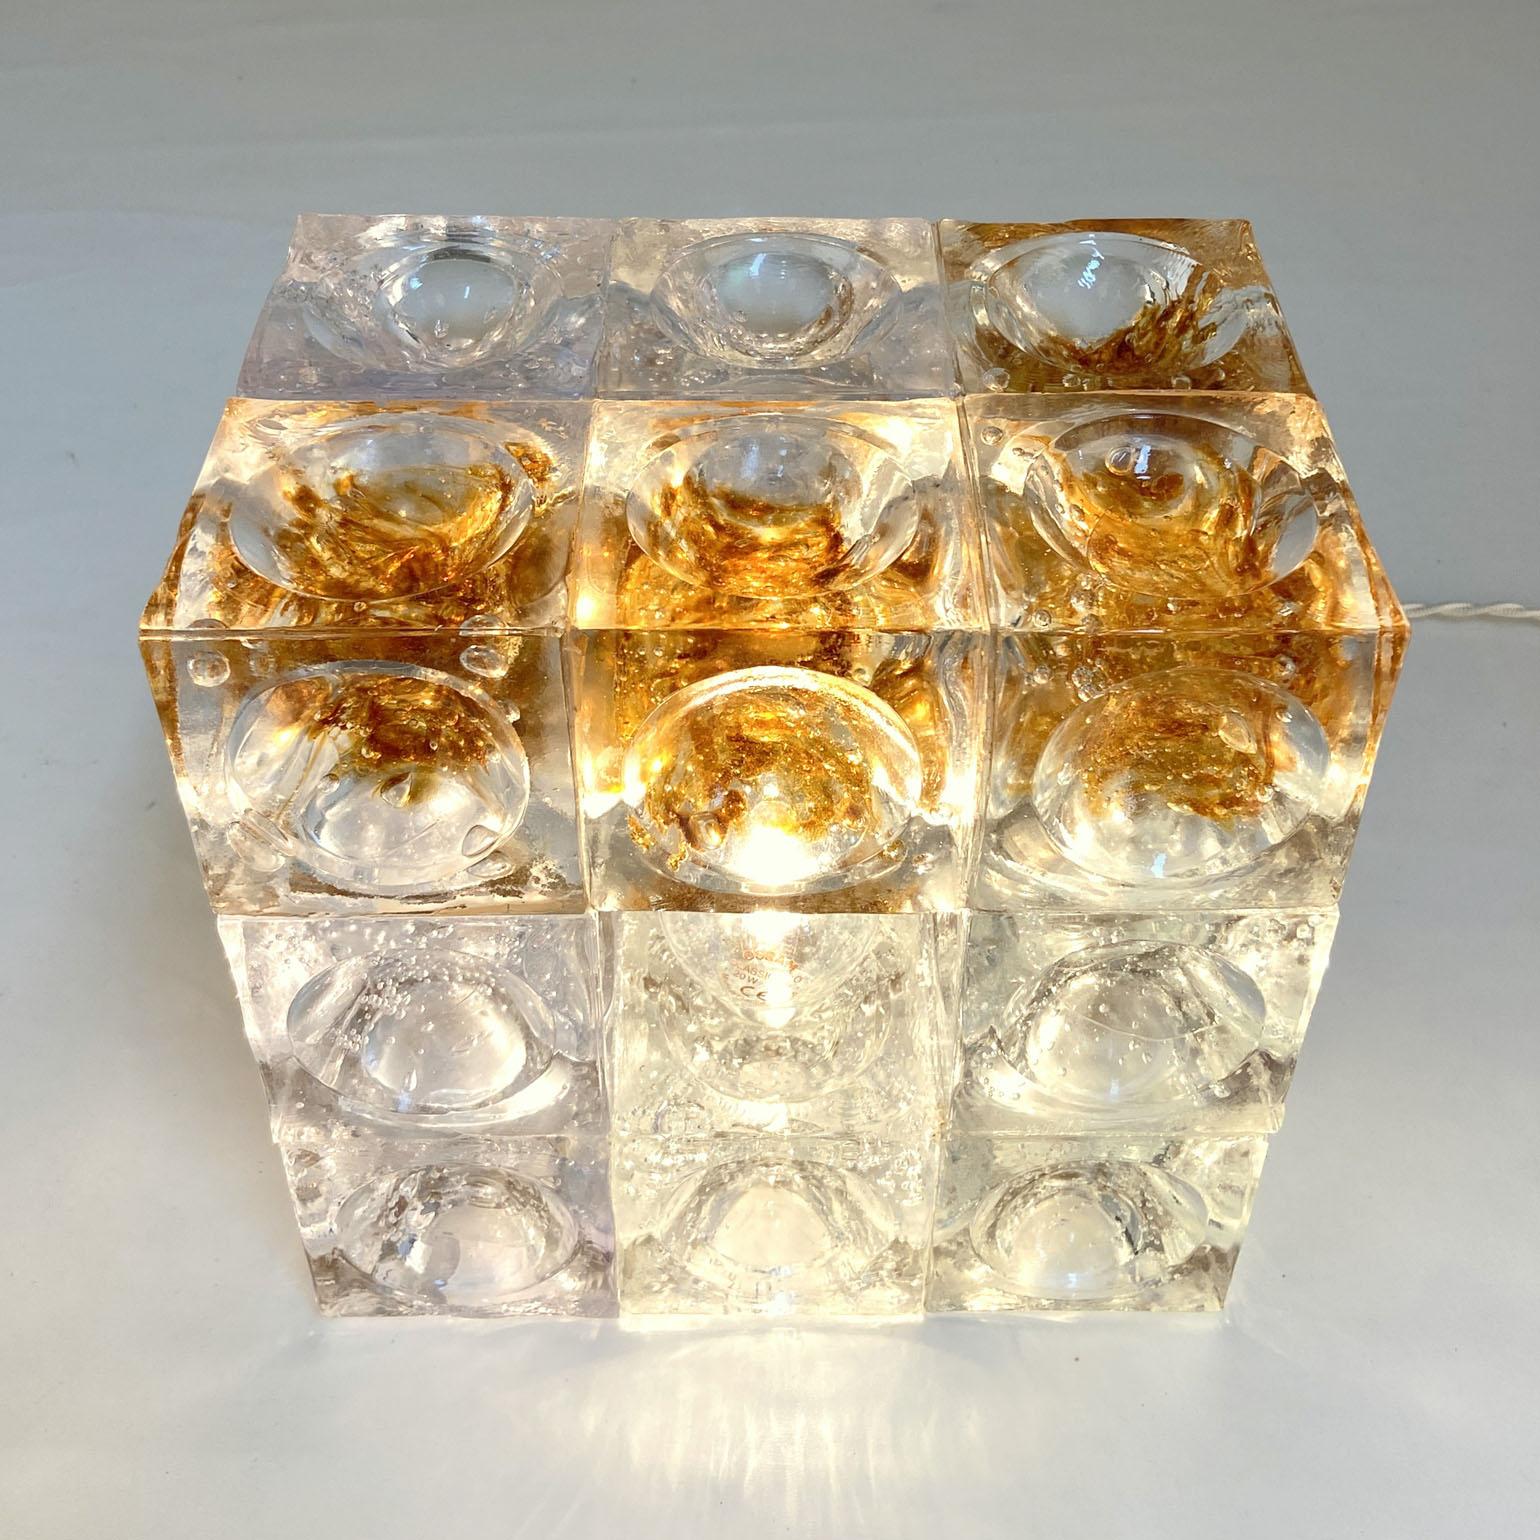 Italian Sculptural Poliarte Table Lamp in Glass Cubes Designed by Albano Poli For Sale